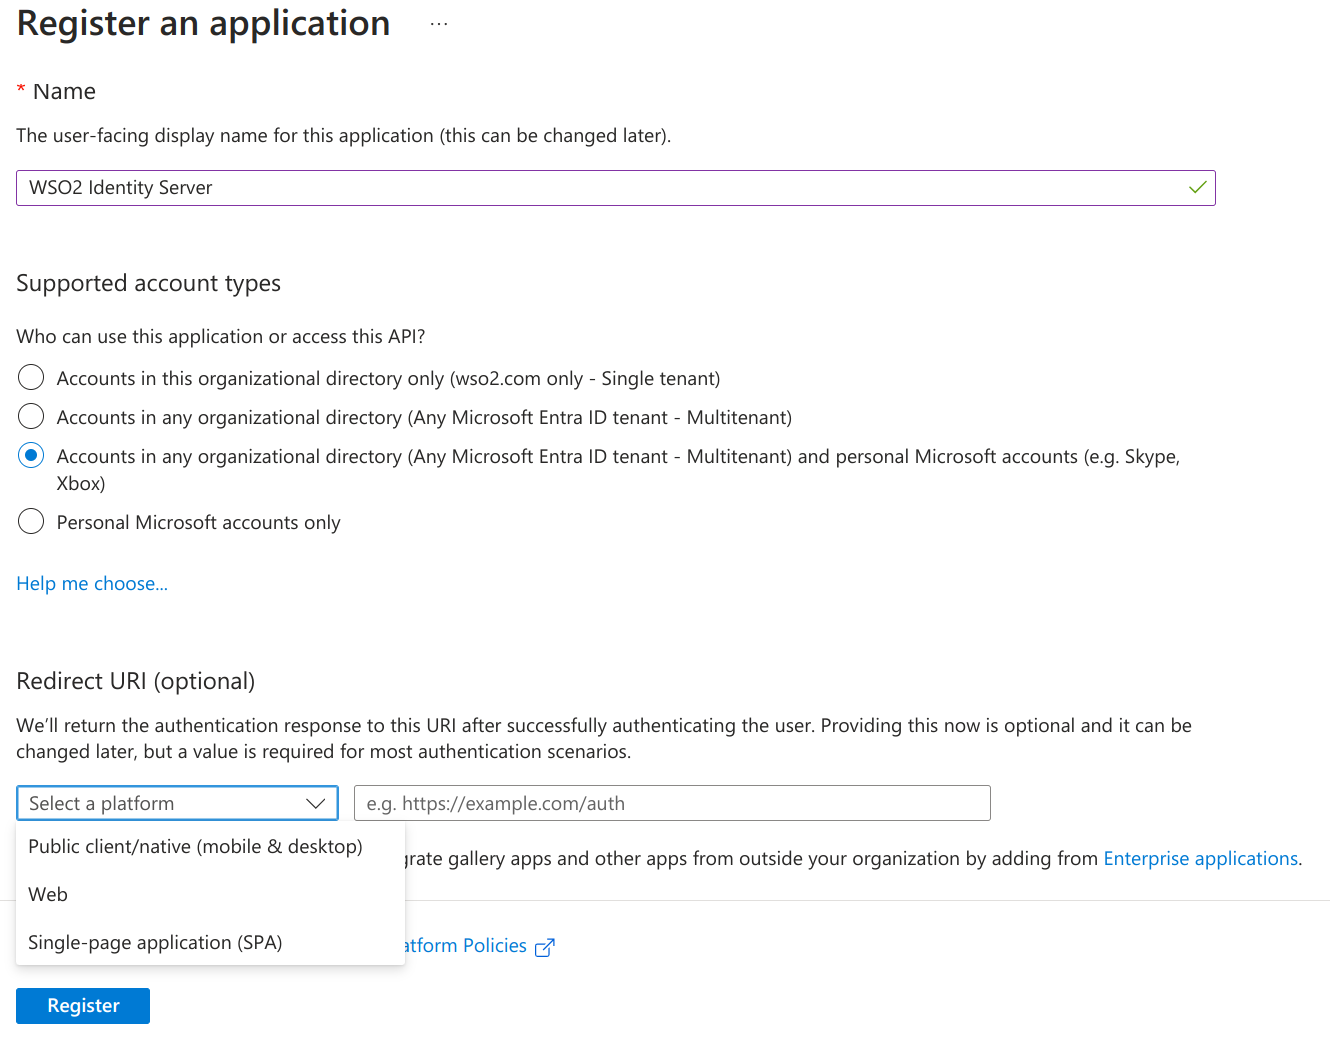 Register an application on the Microsoft Entra admin center